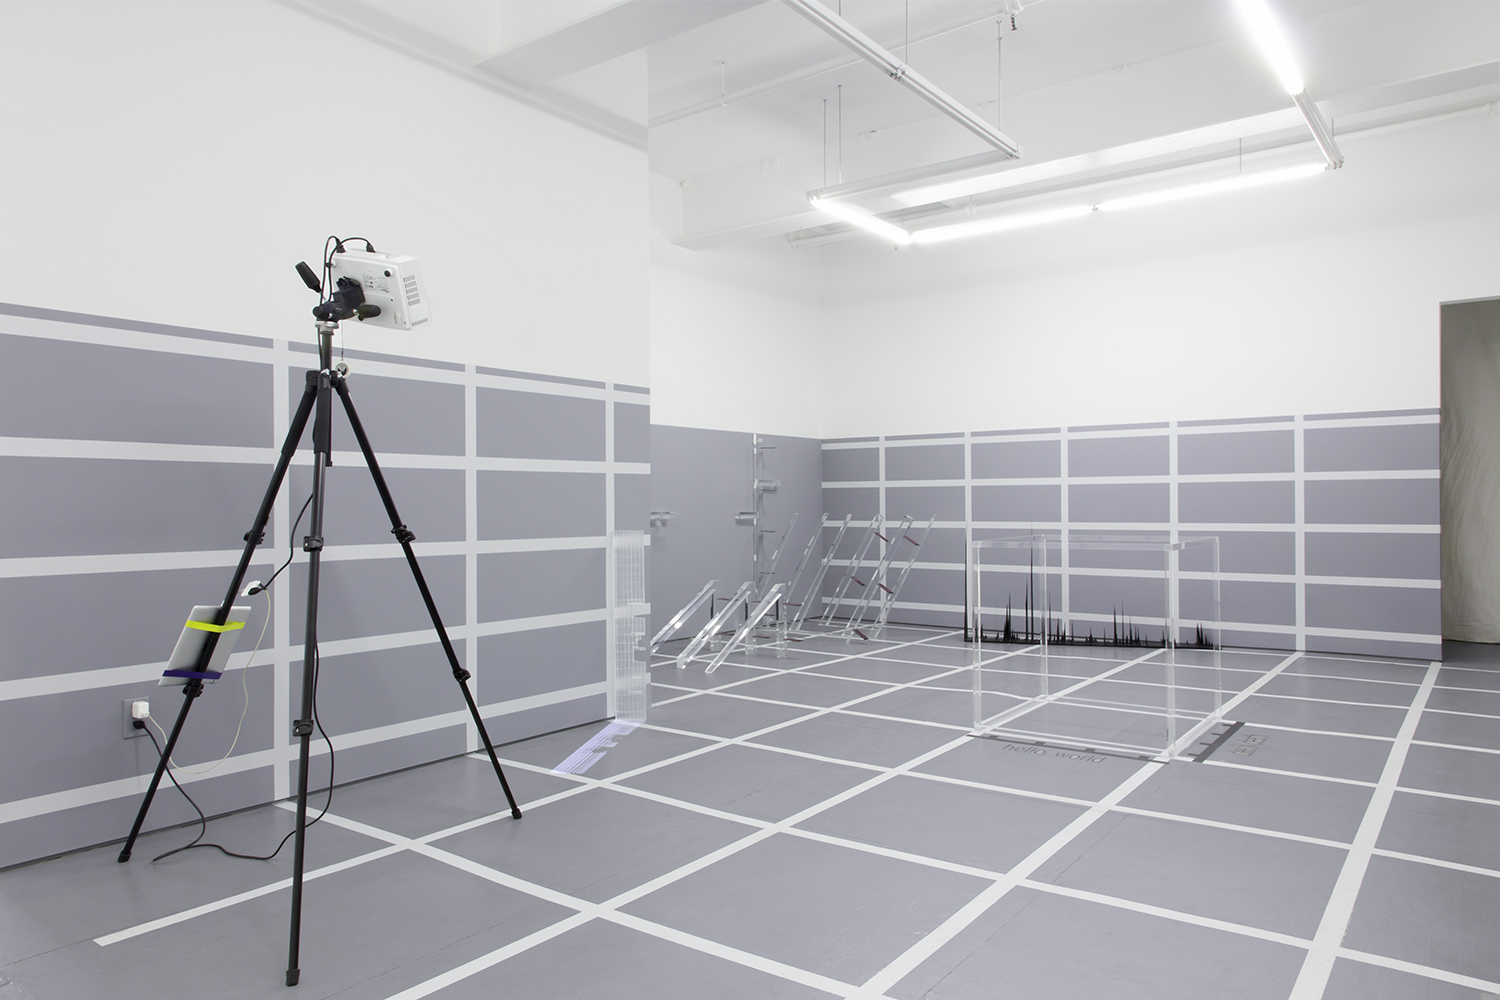 Installation view of 4 sculptural objects in a grid-lined exhibition space